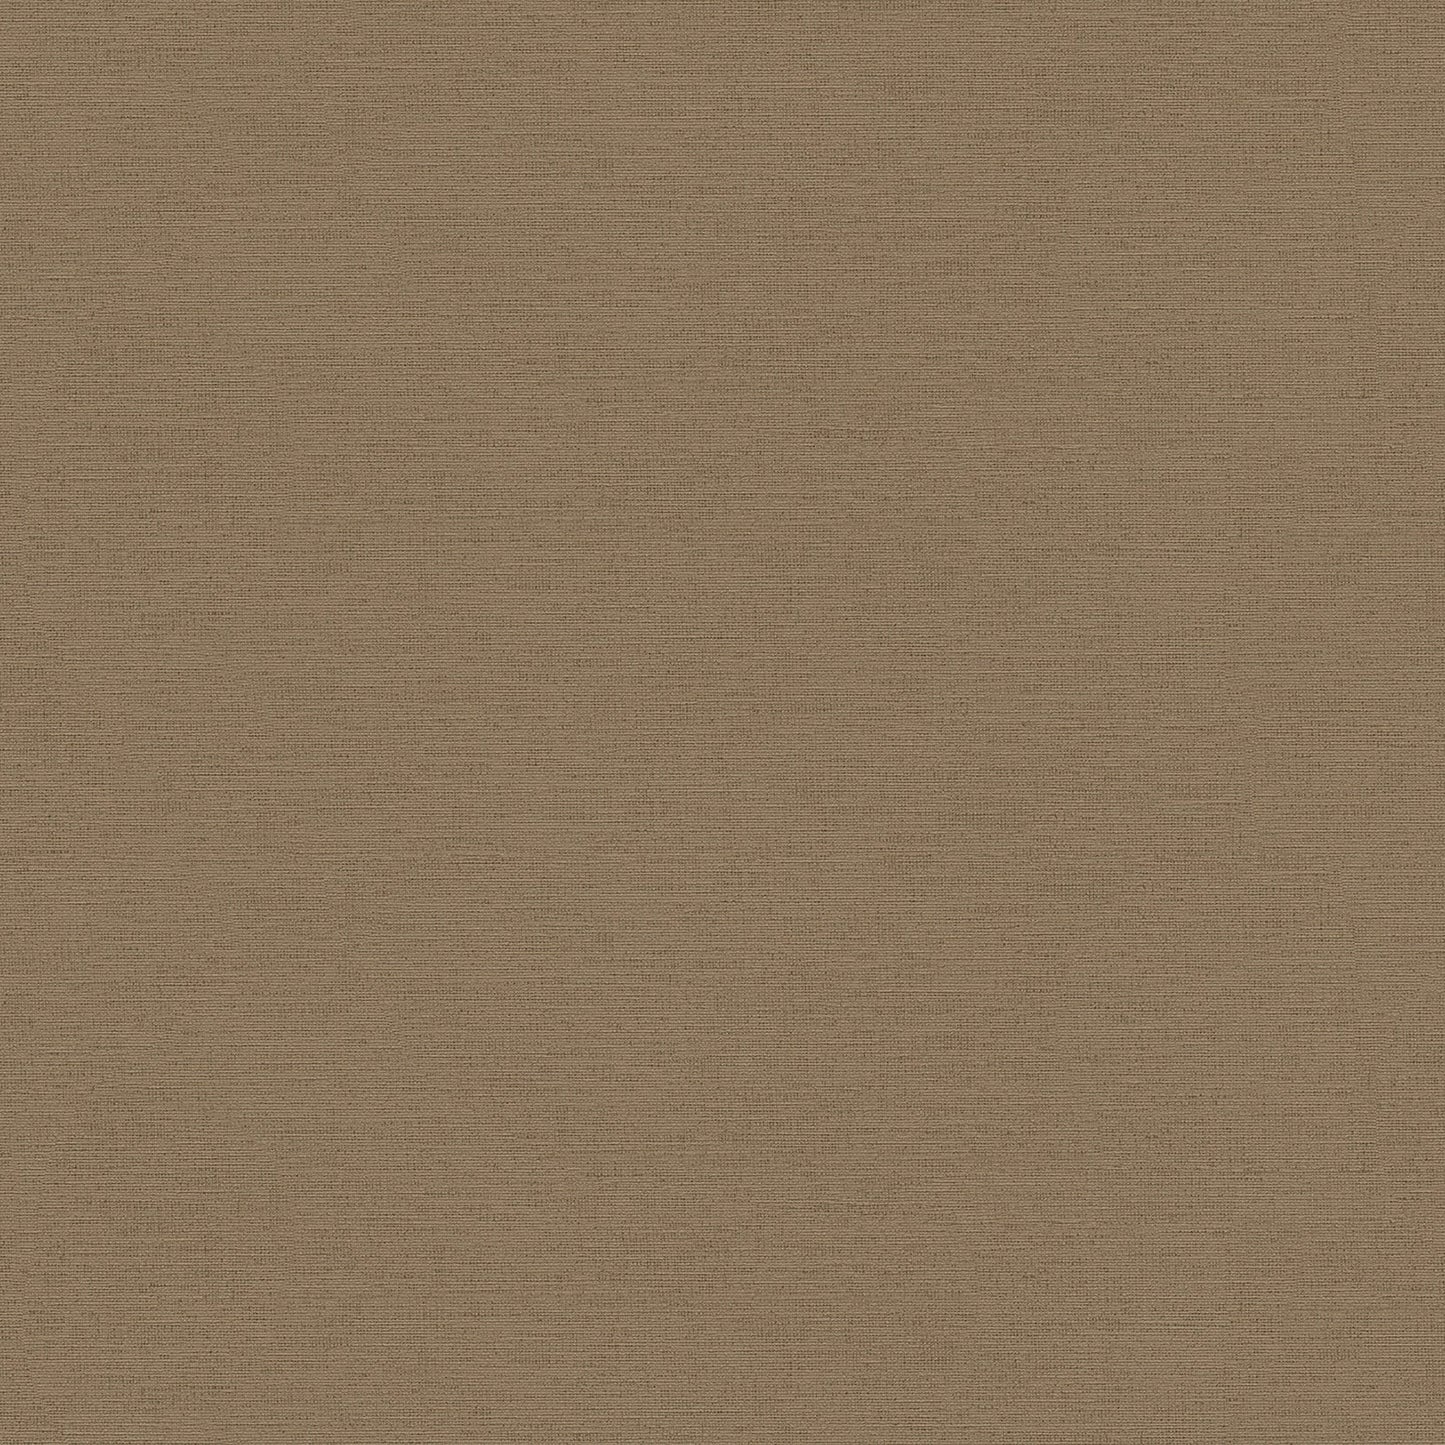 View 4044-30689-2 Cuba Canseco Brown Distressed Texture Wallpaper Brown by Advantage